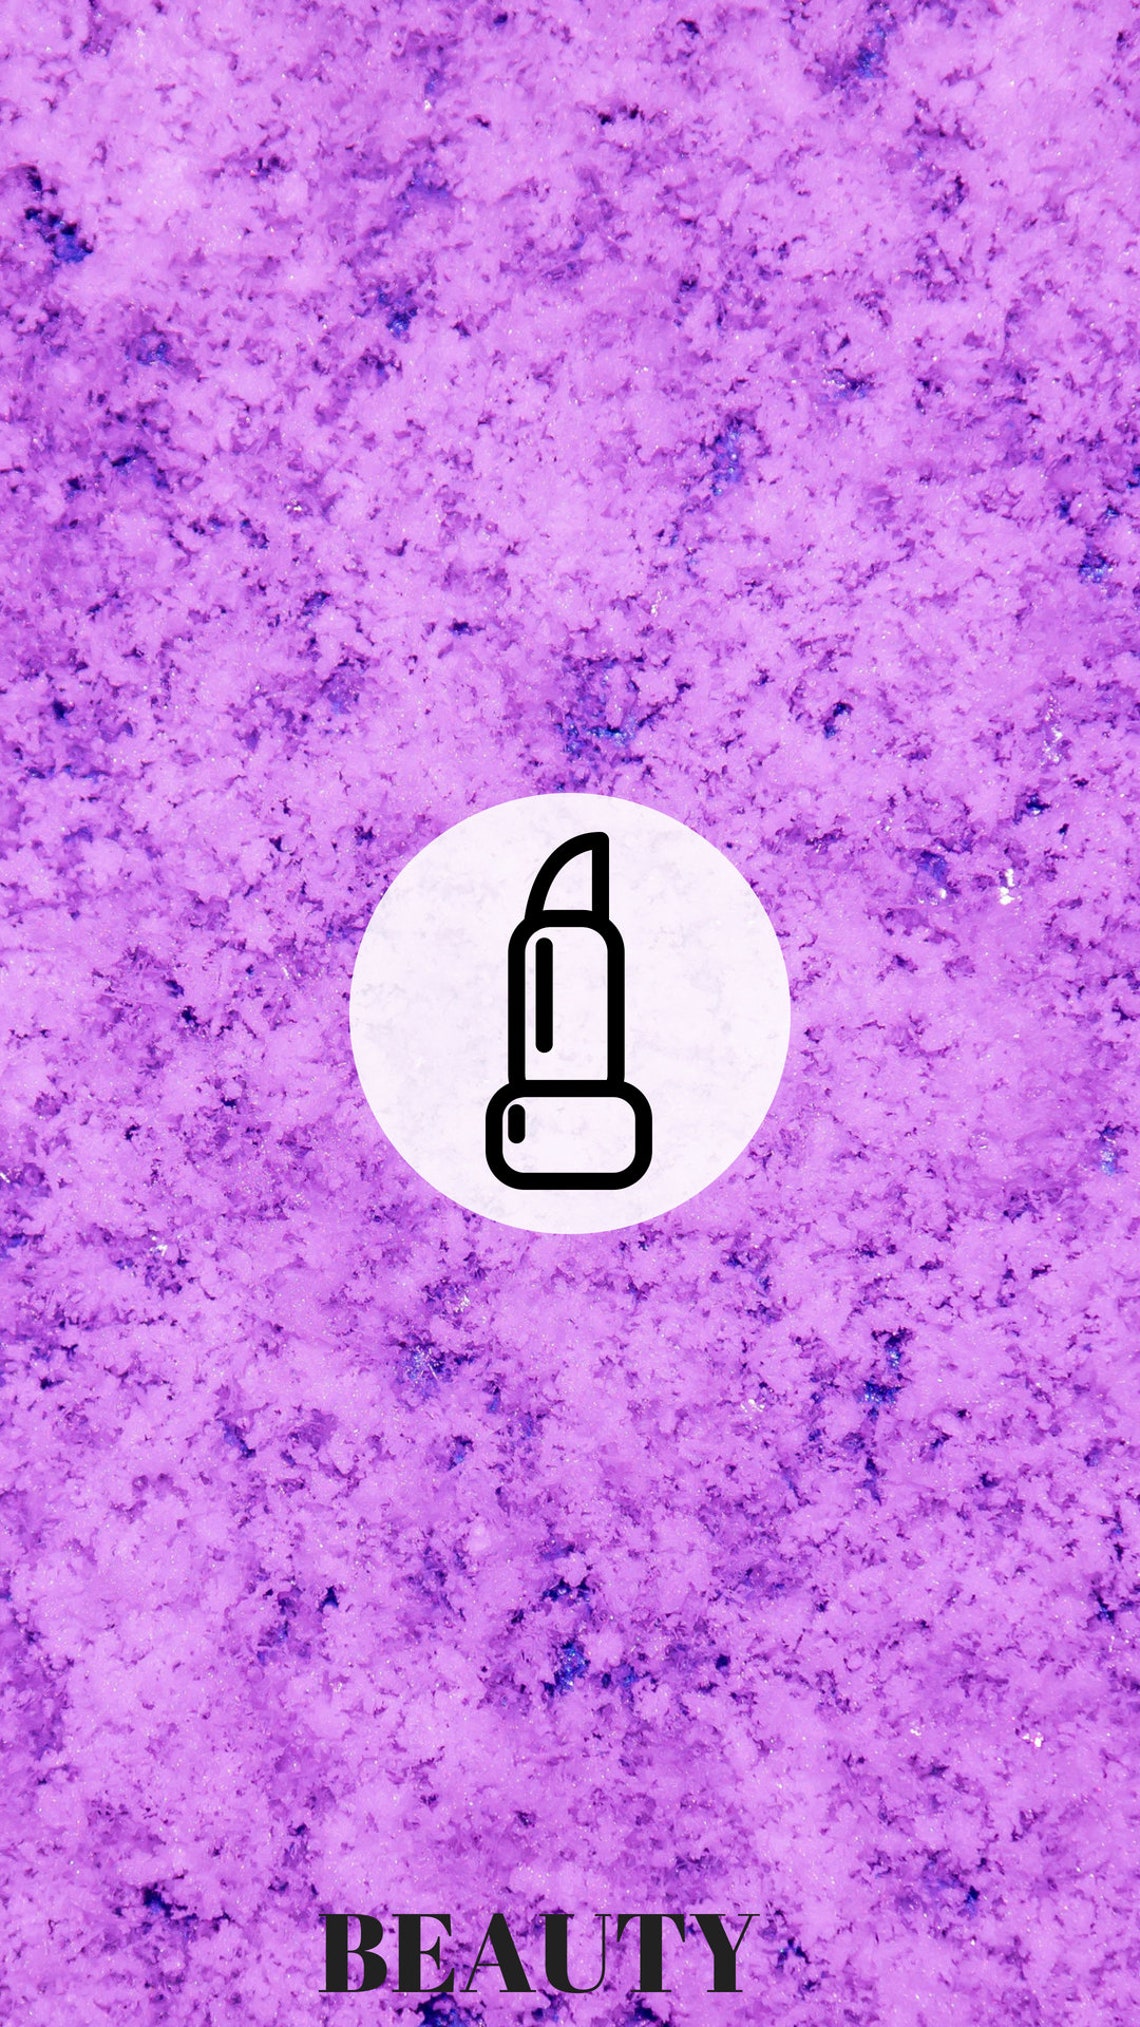 NEW purple highlight icon for insta story | Etsy